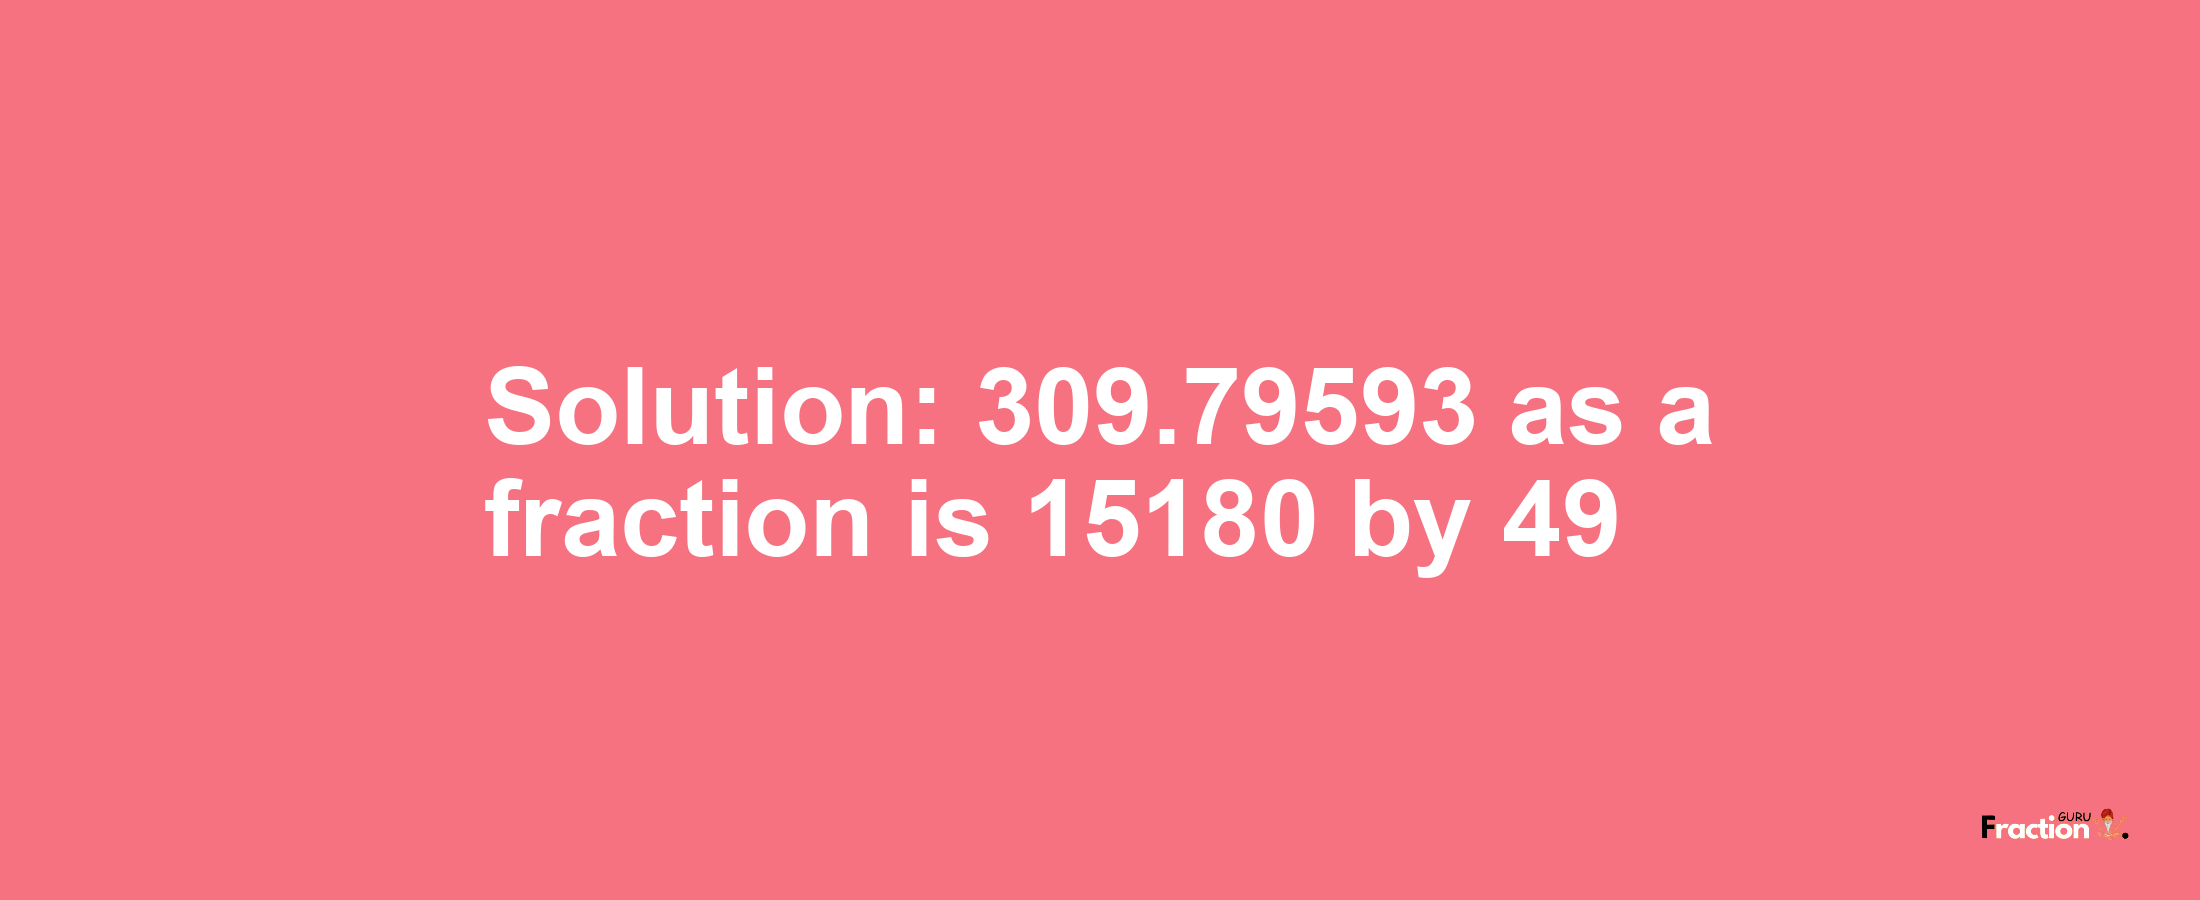 Solution:309.79593 as a fraction is 15180/49